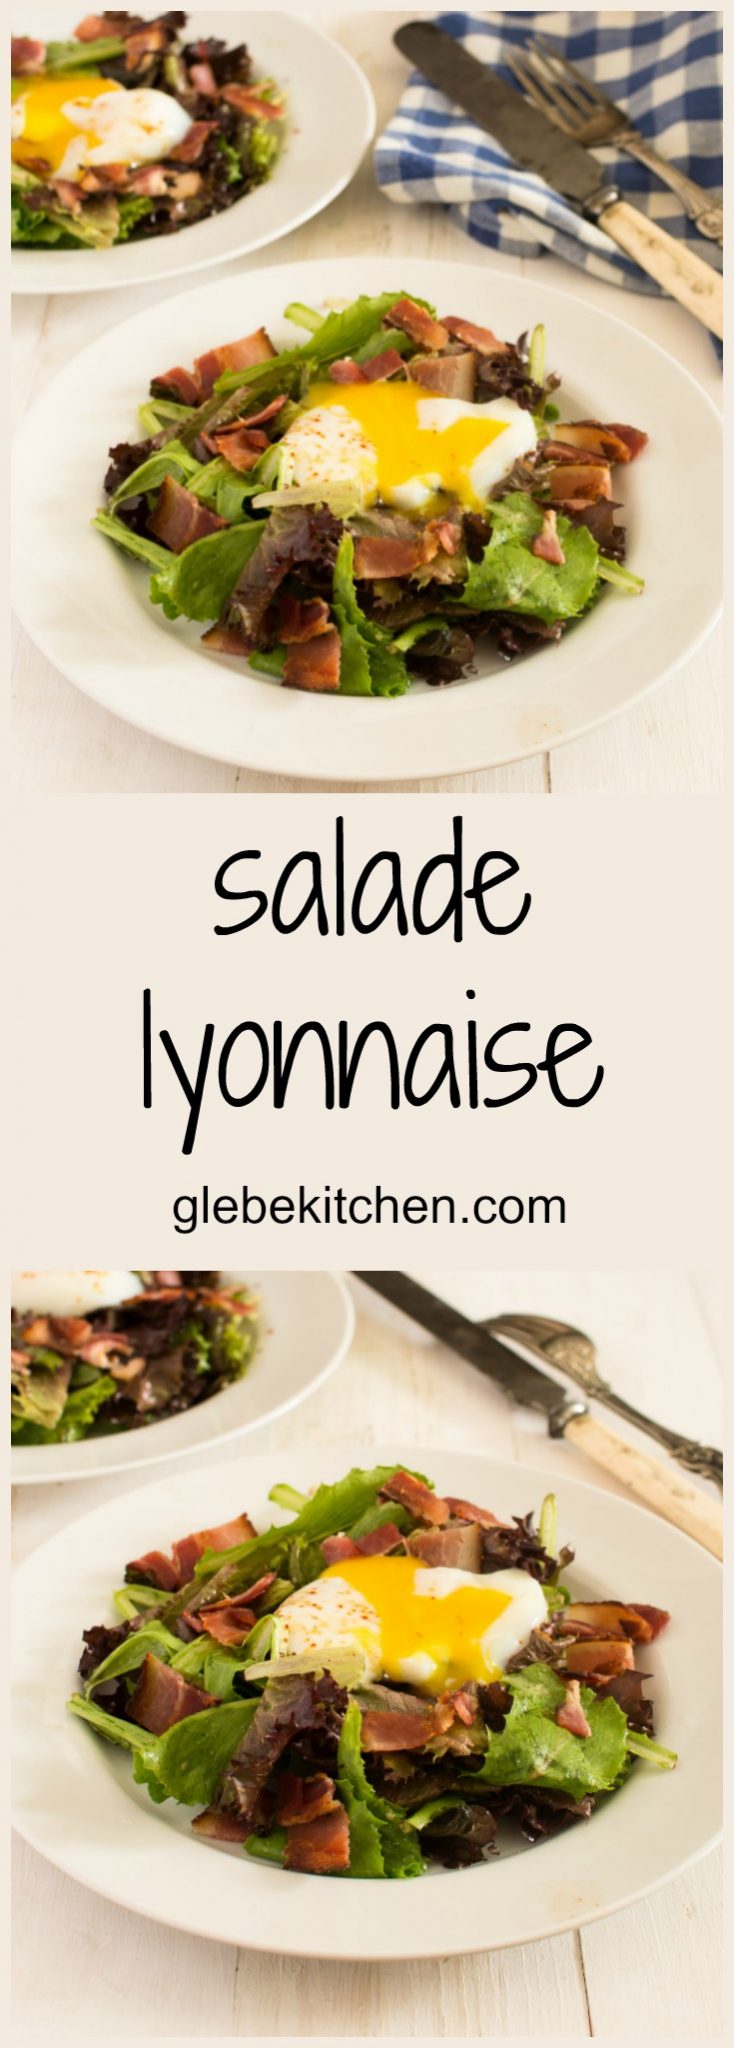 Salade lyonnaise is a classic French salad with poached egg and bacon.